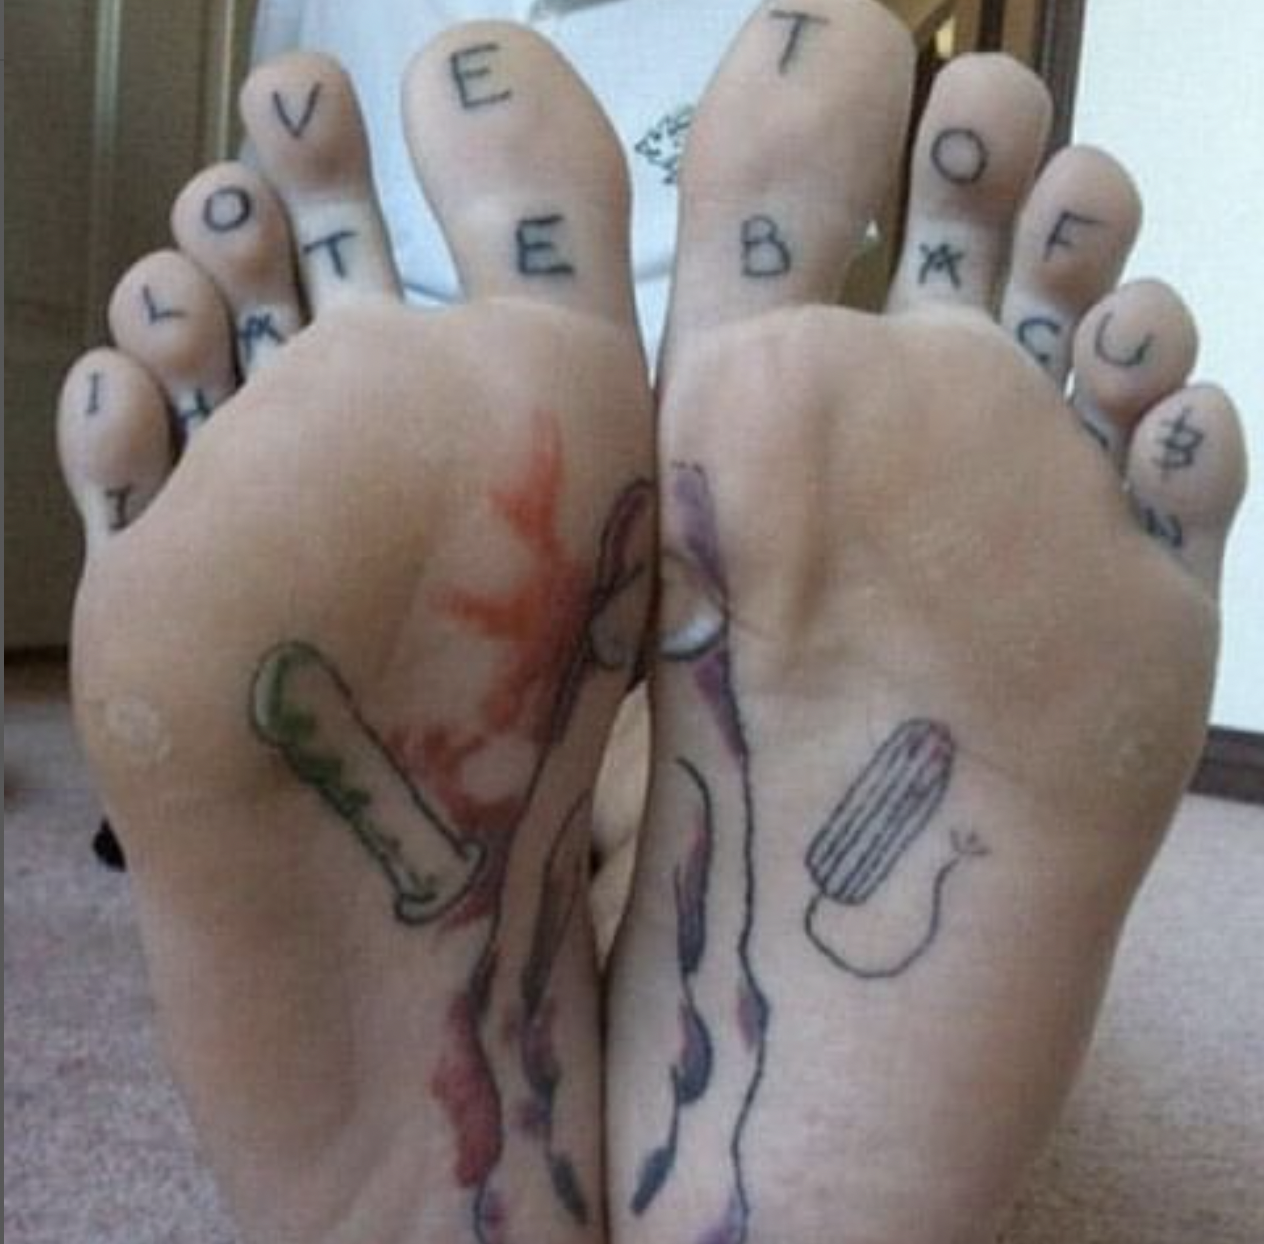 21 People Who Had Ink Done and Immediately Regretted It - Funny Gallery